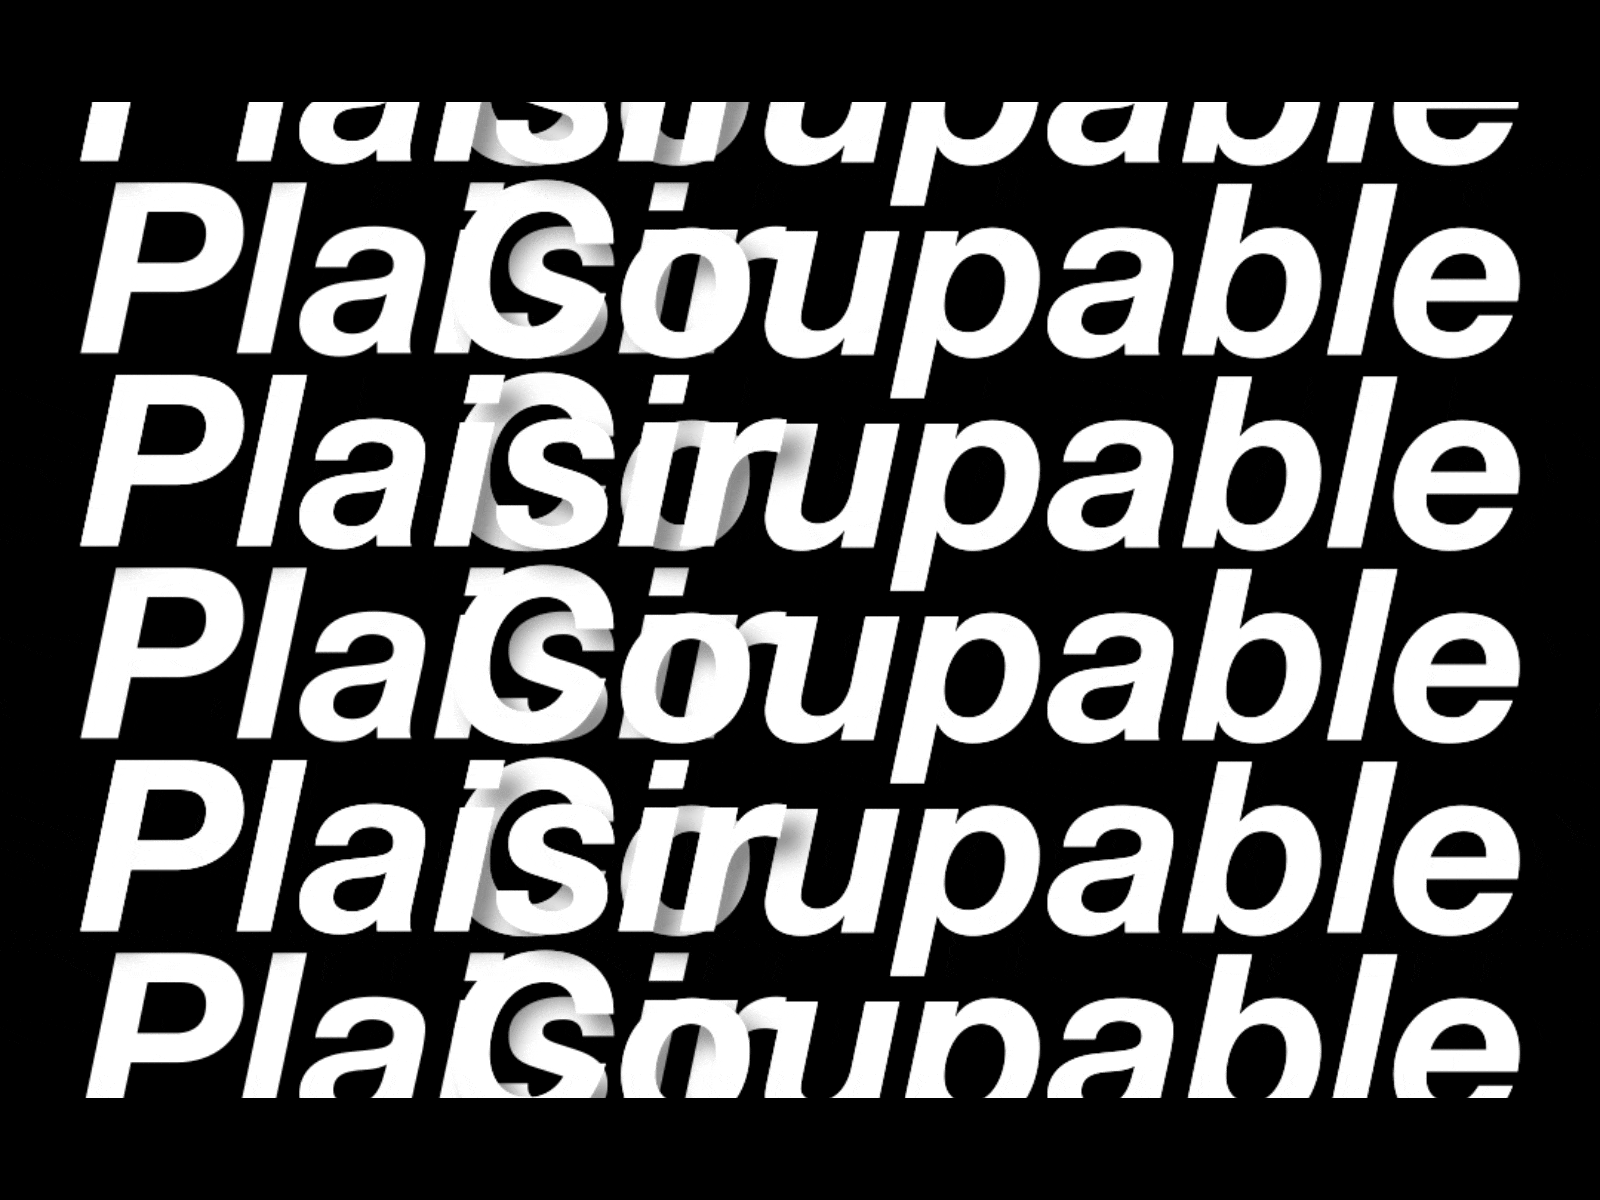 Plaisir Coupable 2d animation animation after effects black black white bold design graphic design helvetica loop minimal design minimalism motion design motion graphics type typeface typegraphy typography